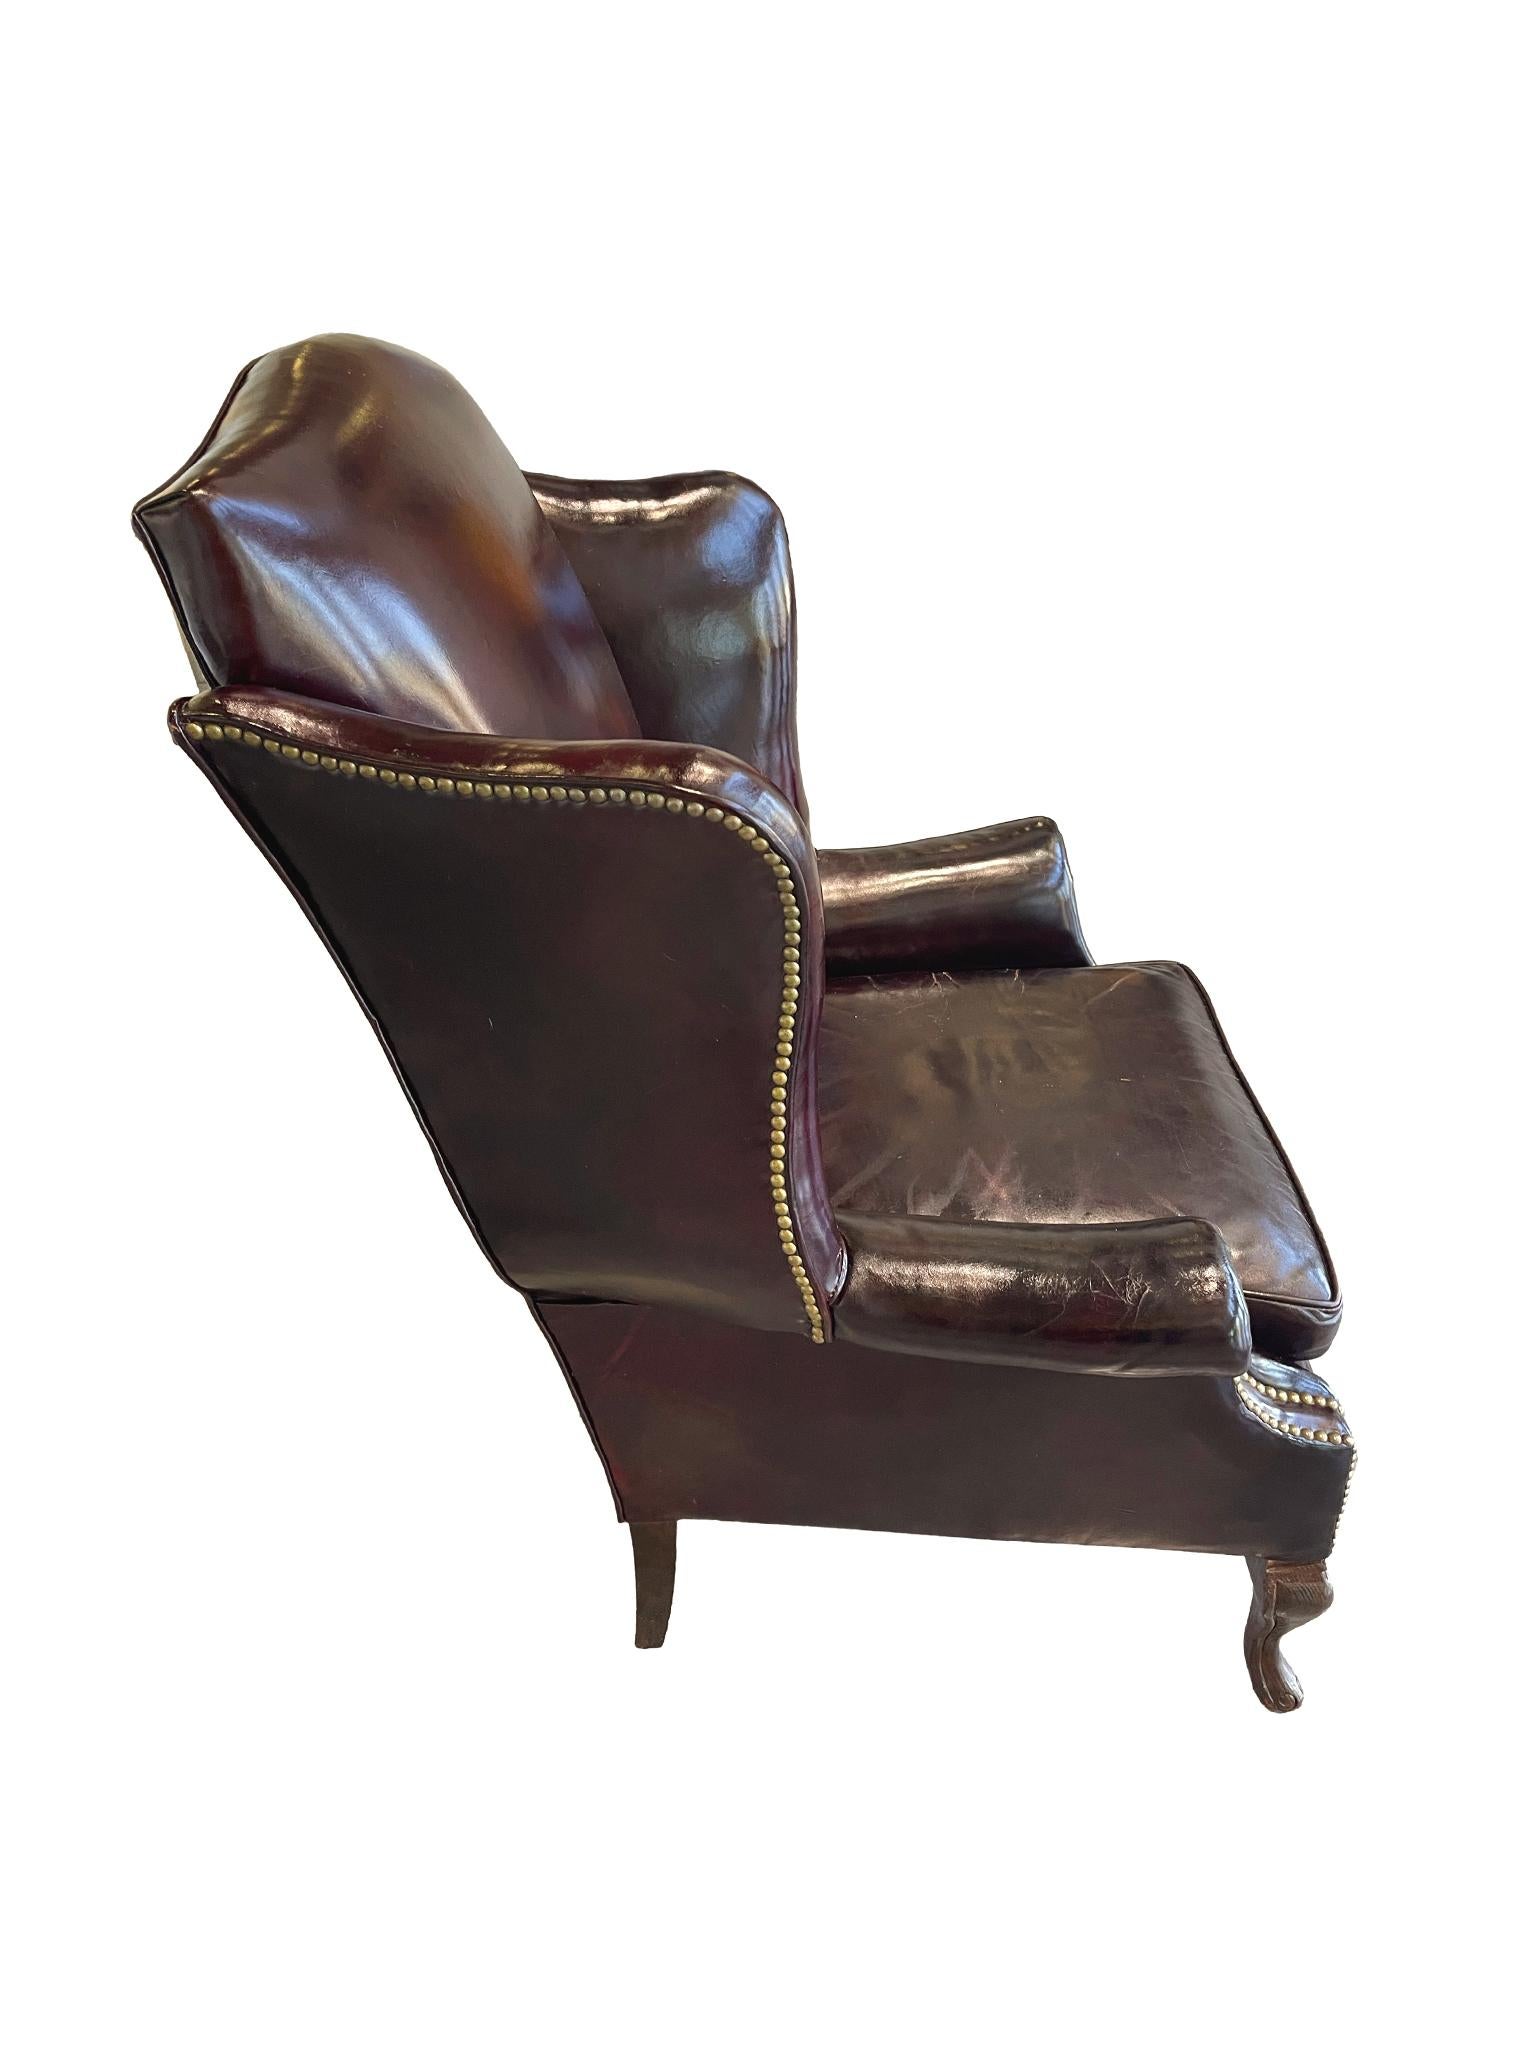 Early 20th century Queen Anne-style wingback, with beautifully aged burgundy-toned leather, brass stud trimming, and cabriole front legs.

Dimensions:
28 in. depth
33 in. width
22 in. interior width
47 in. height
20.5 in. seat height

Condition